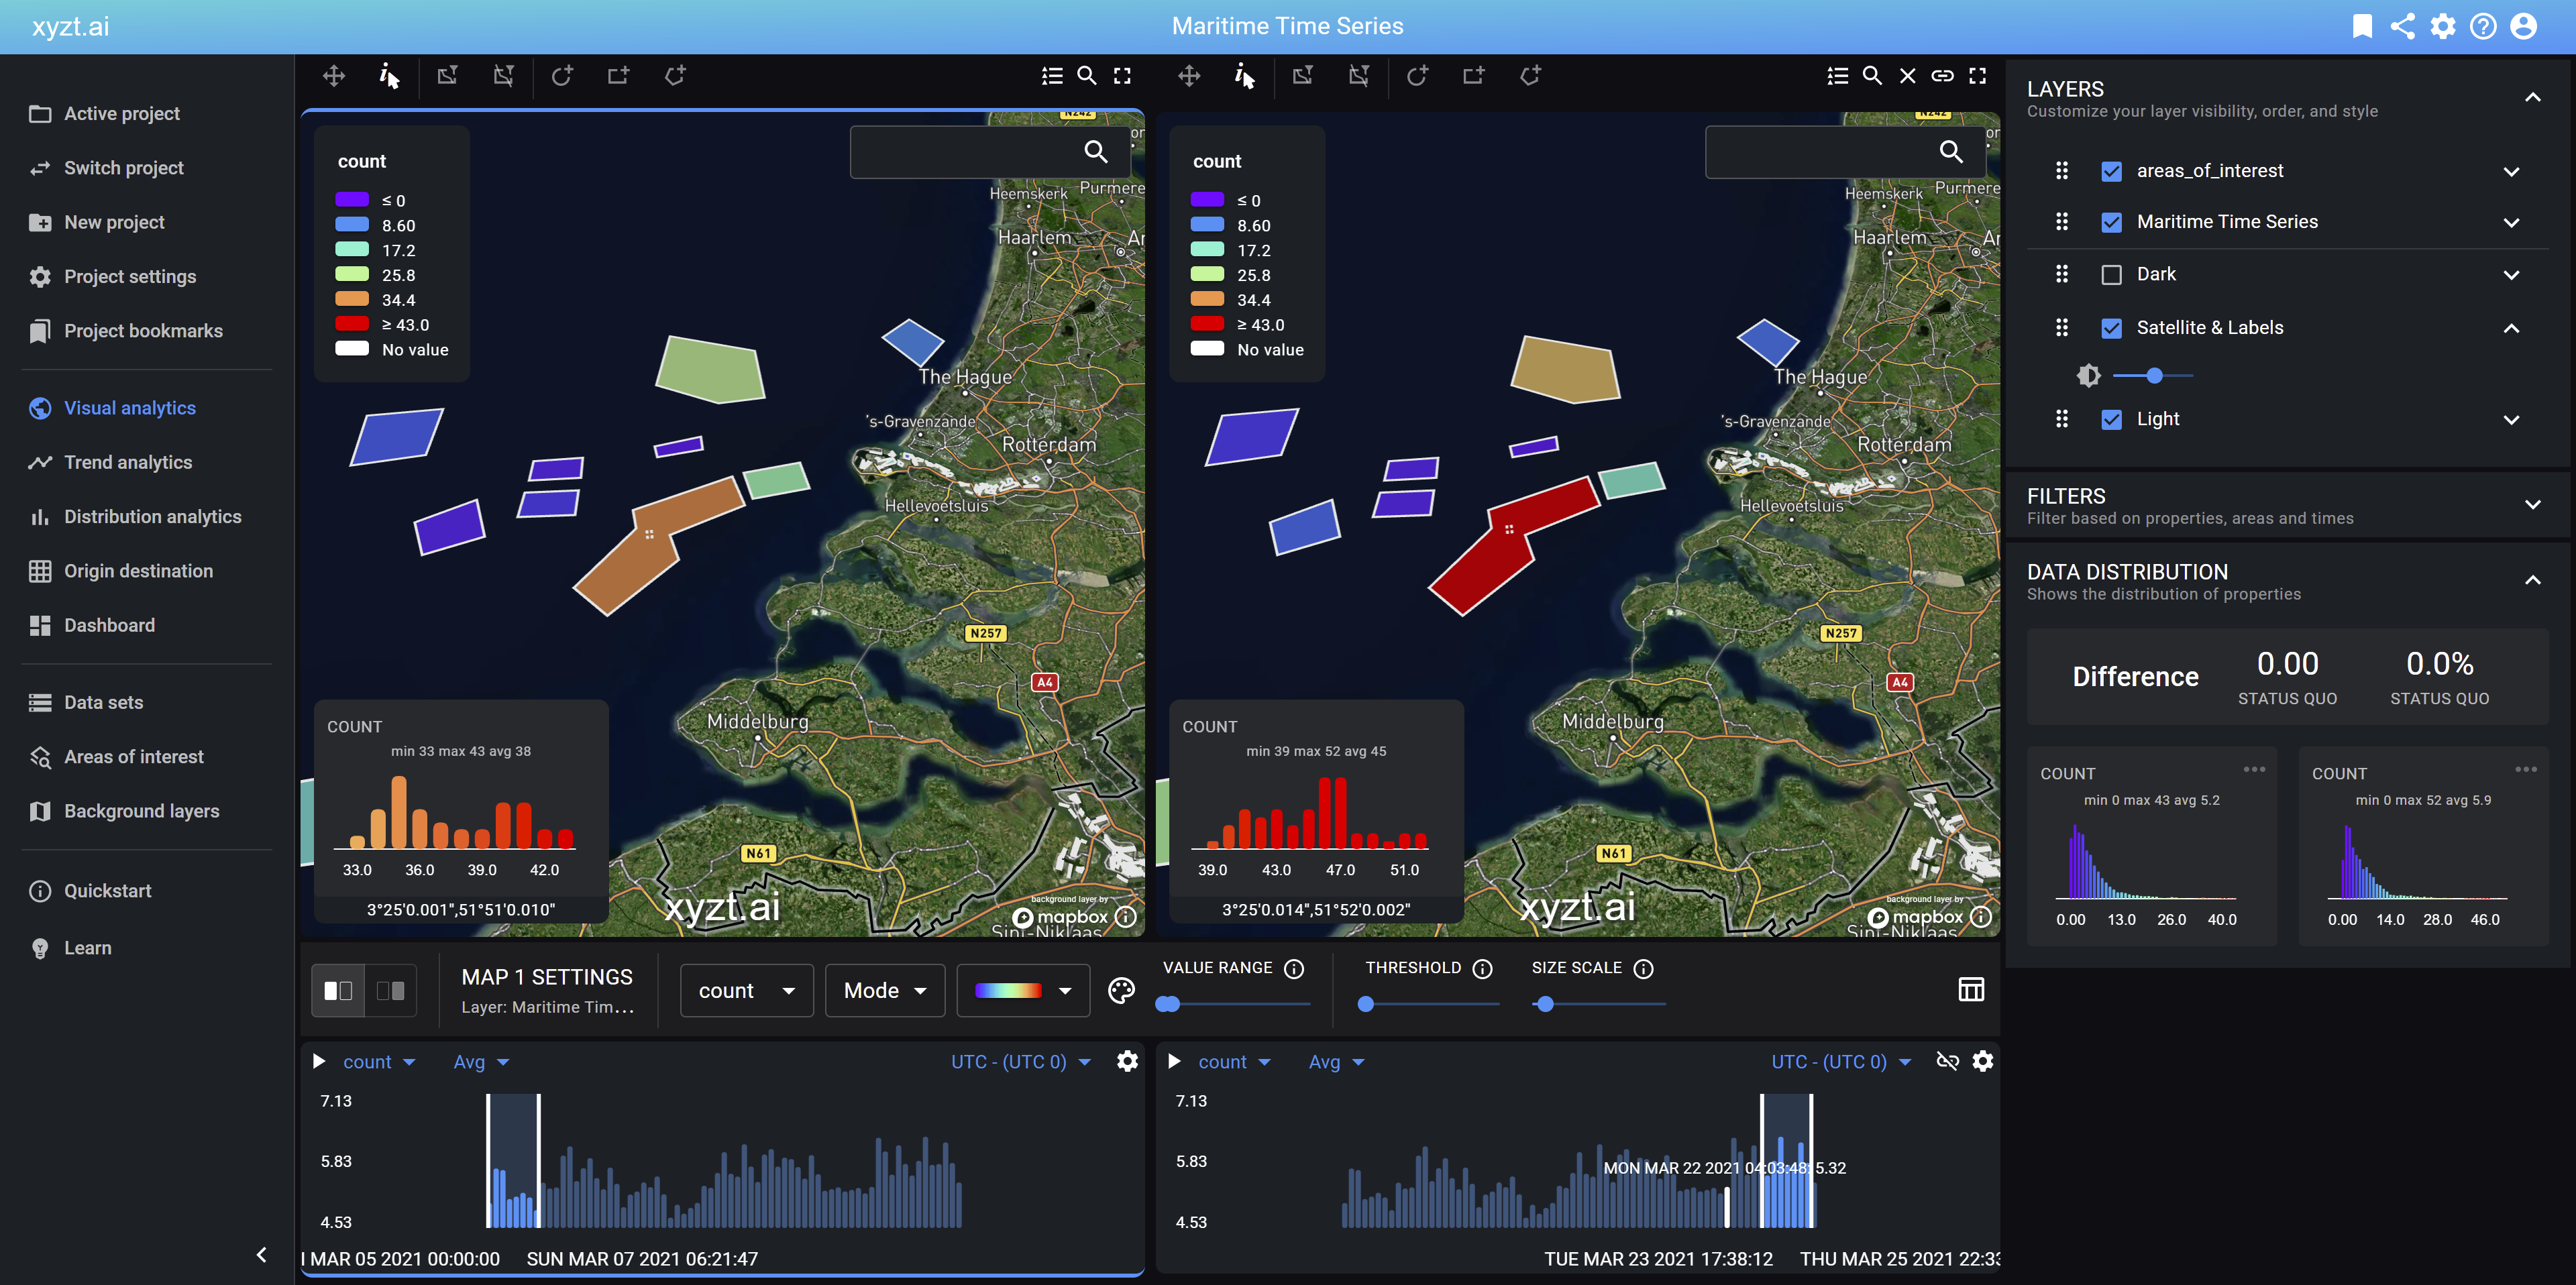 Monitoring anchorage zones for maritime time series data analysis